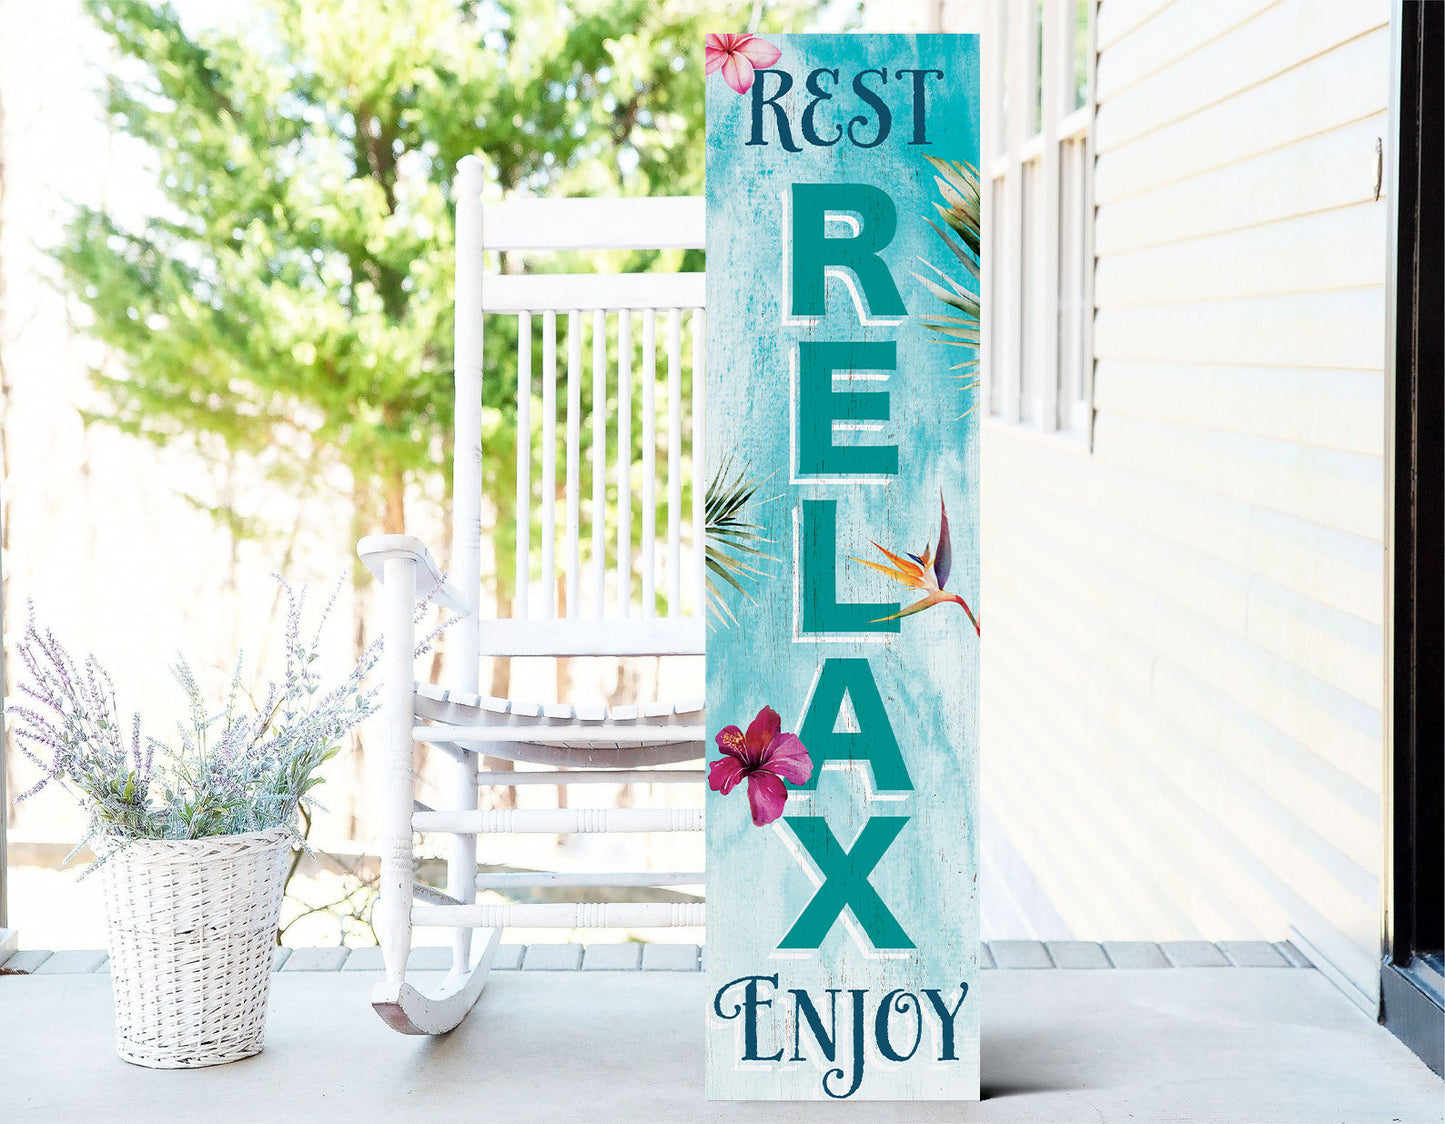 36in Wooden "Rest, Relax, Enjoy" Summer Welcome Porch Sign for Front Door, Rustic Home Decor, Outdoor Wall Art, Beach House Patio Display